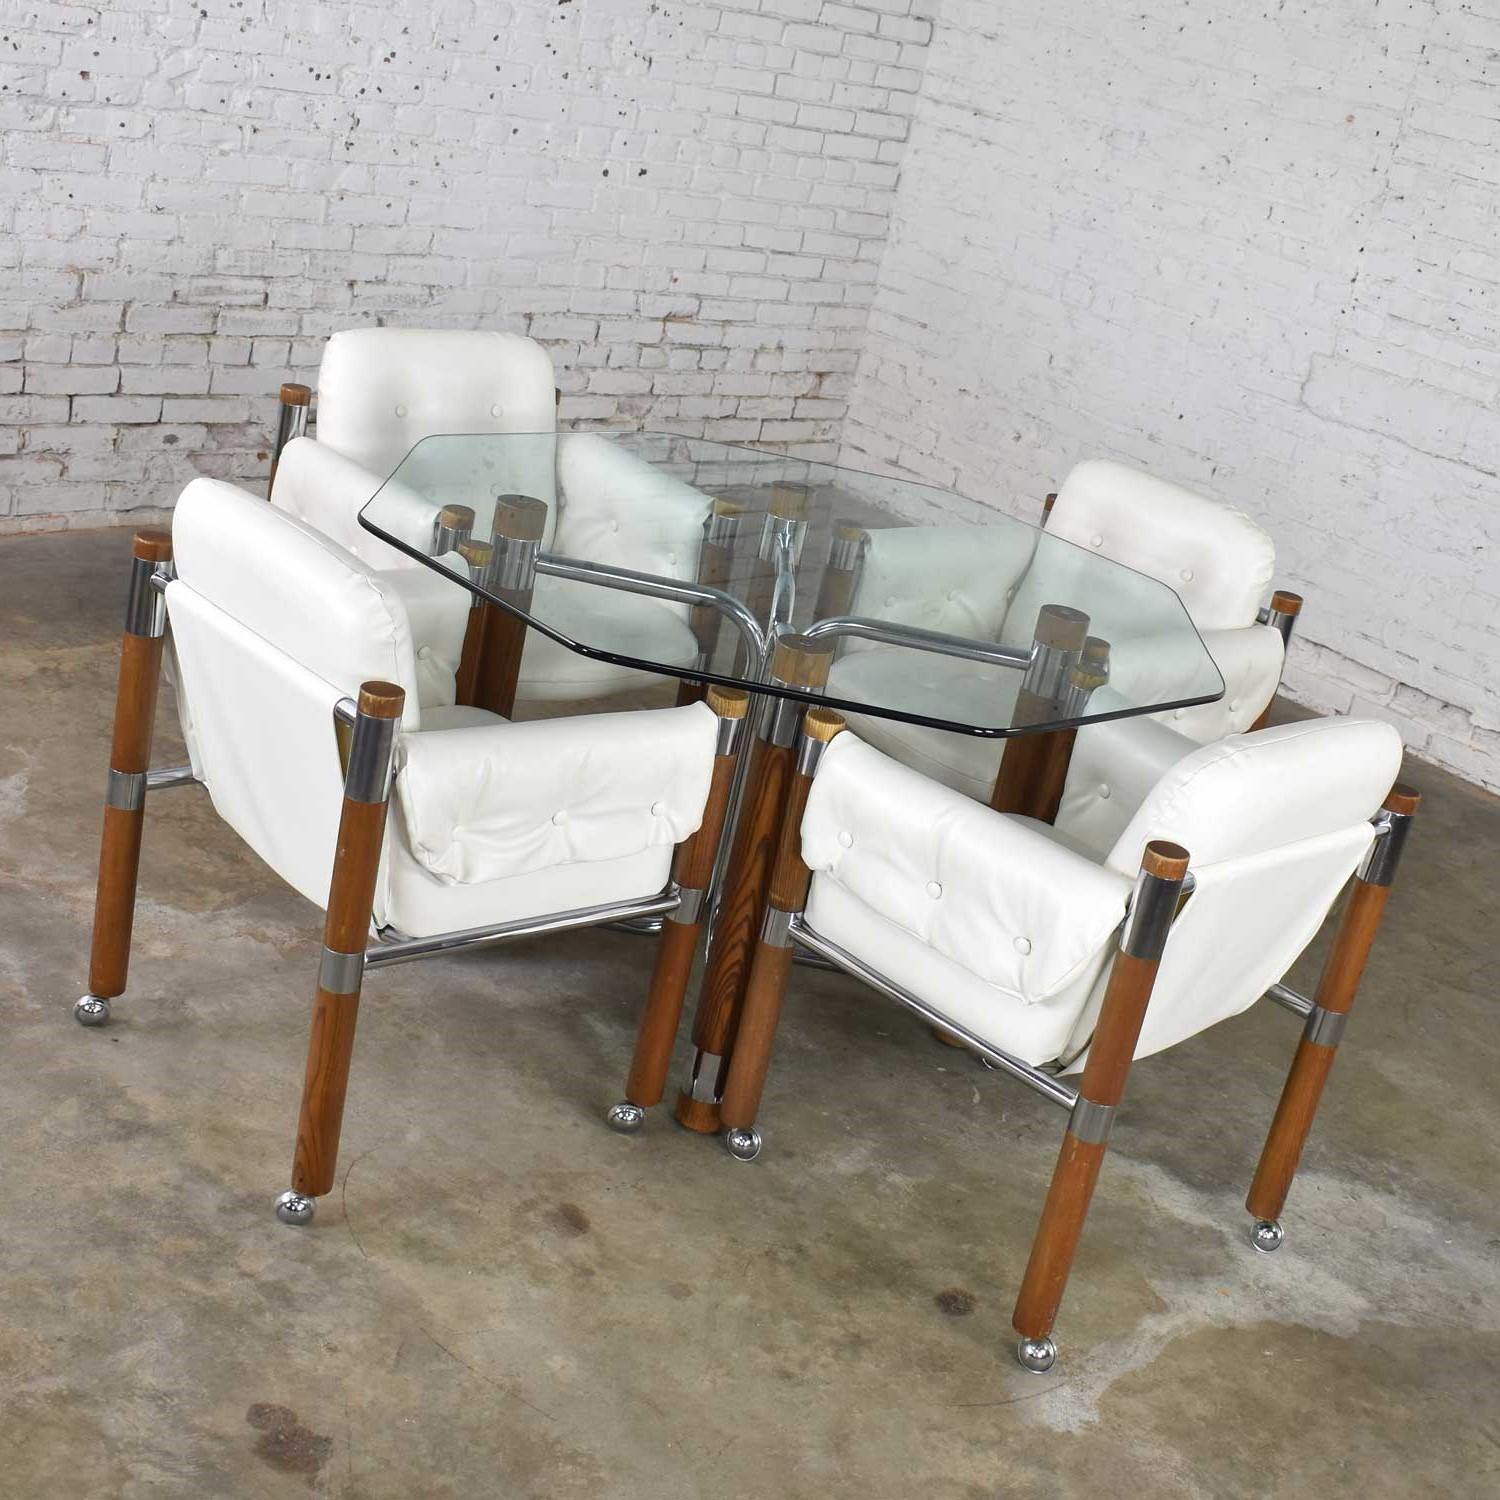 Unknown Modern Game Table or Dining Table Glass Chrome Oak with Four White Rolling Chair